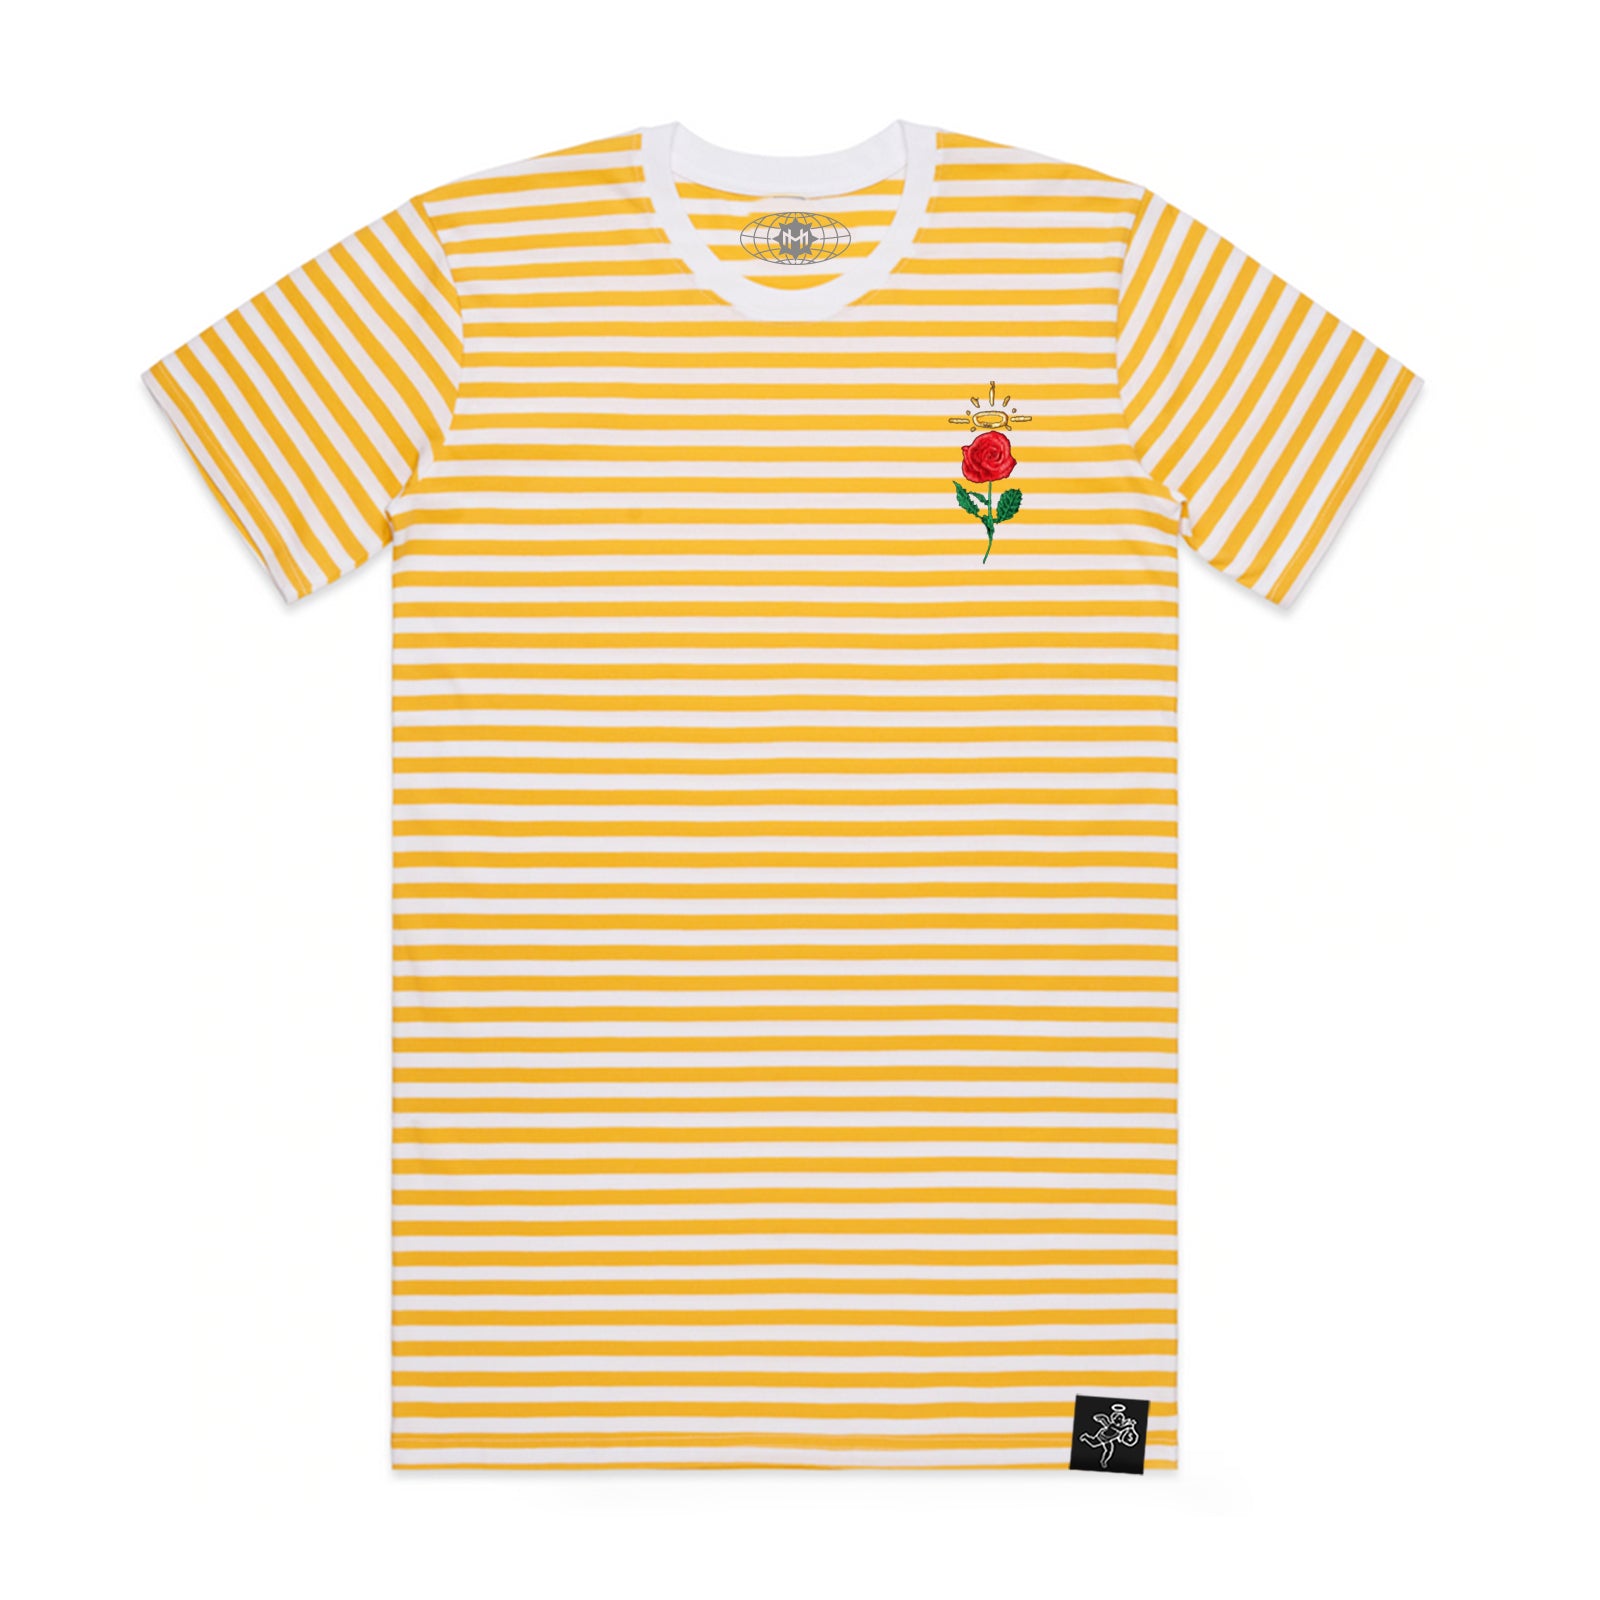 Embroidered Rose Stripe Tee Yellow / White